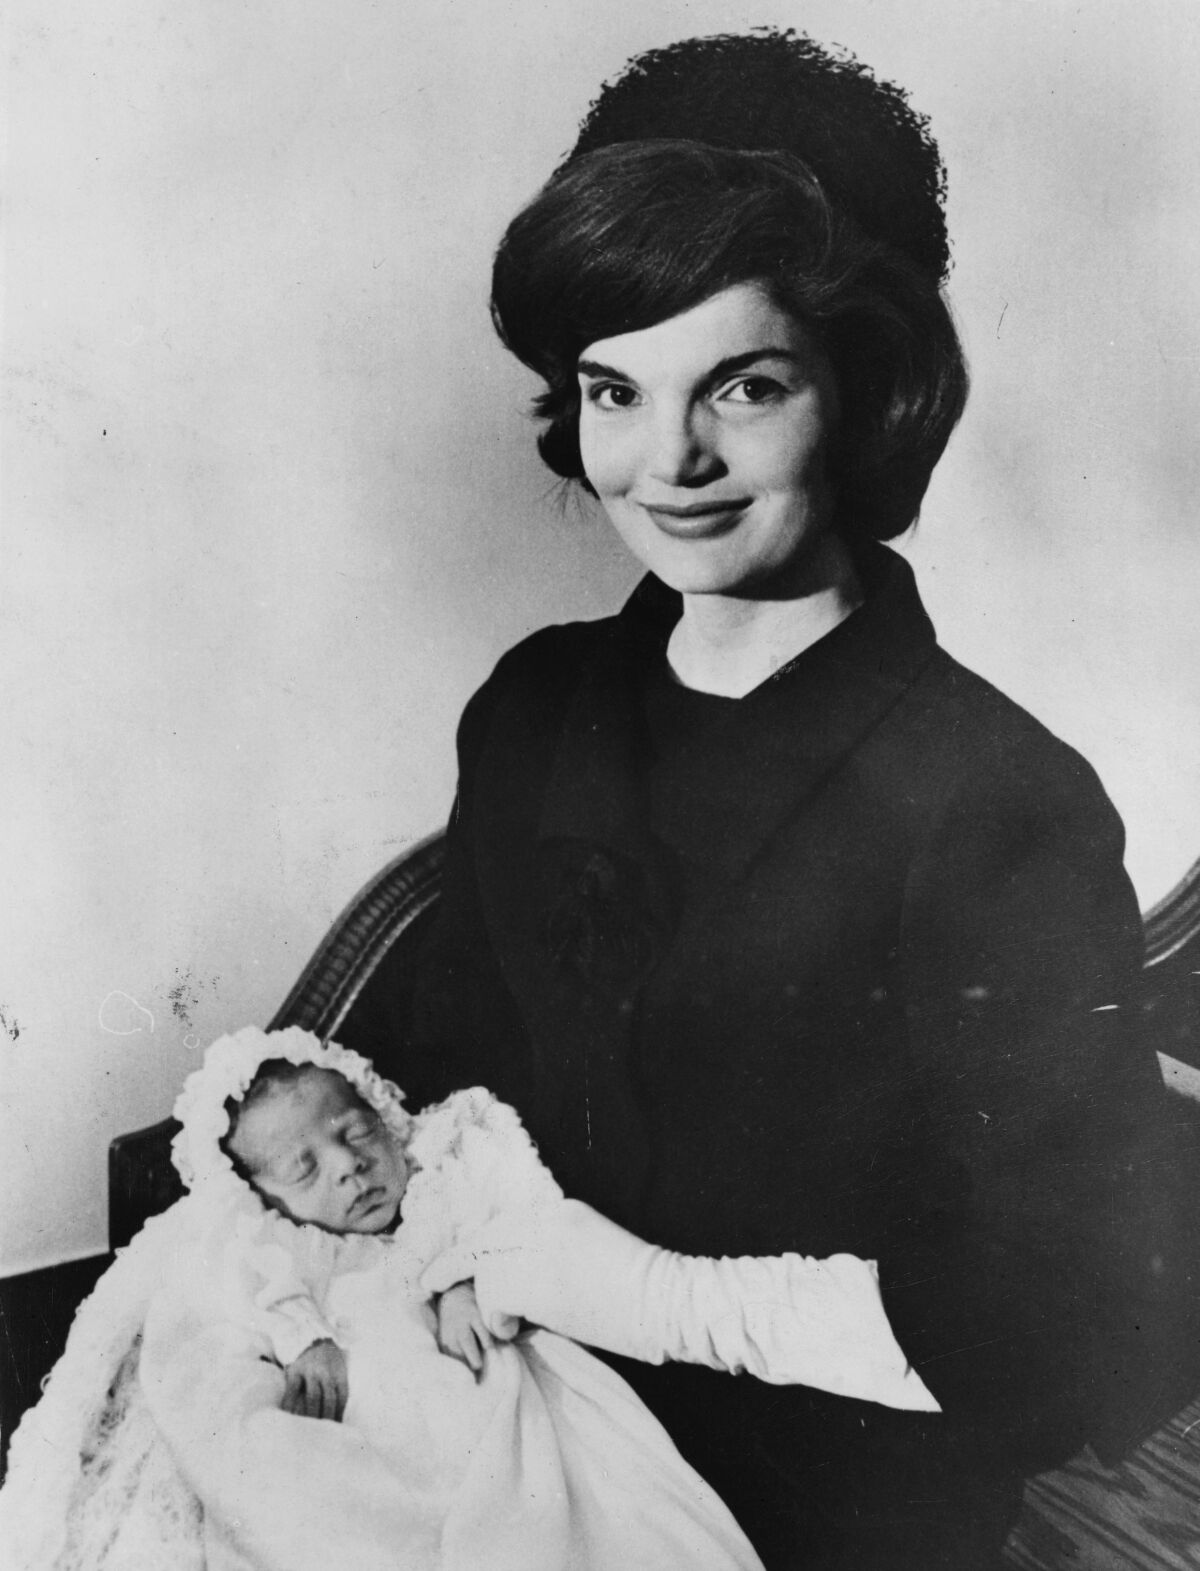 Jackie Kennedy smiles while holding a baby